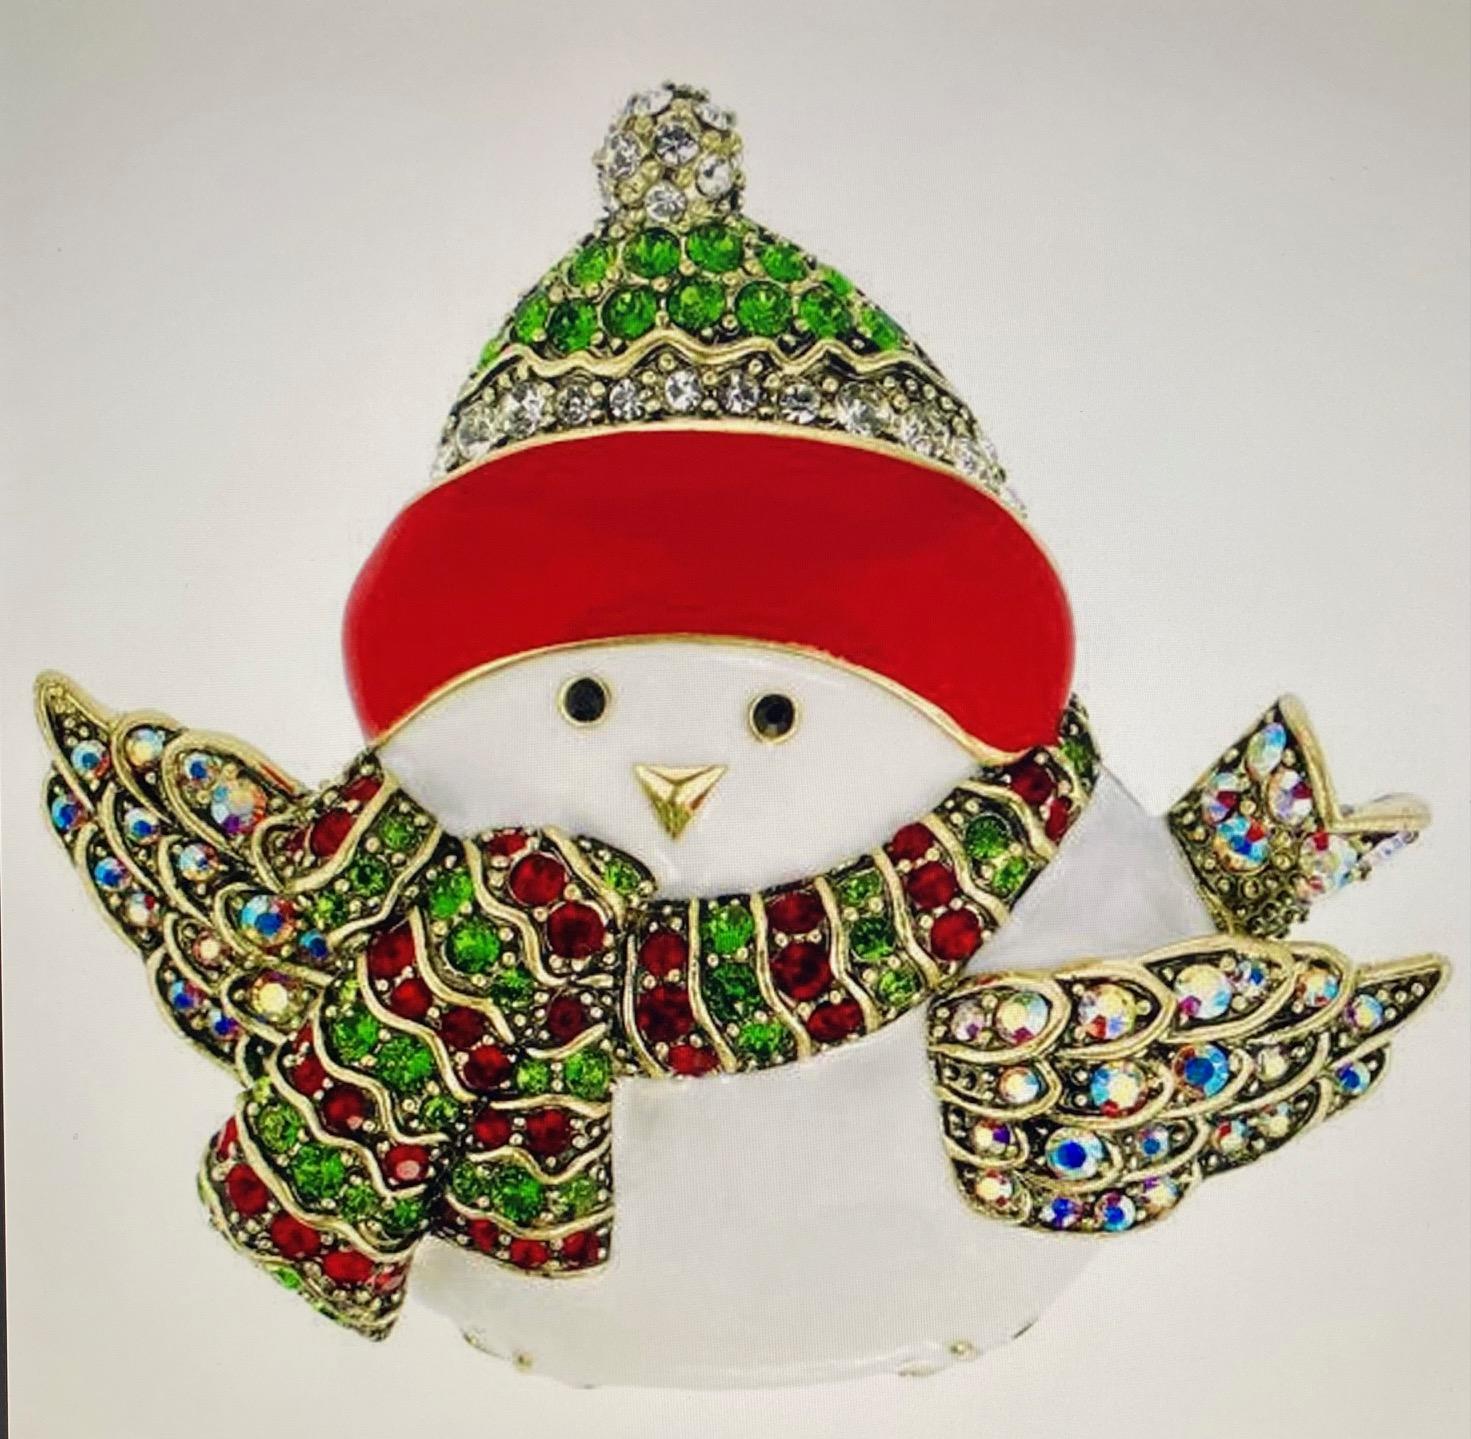 Heidi Daus Baby Snow Bird Crystal Pin Brooch

Let our sweet Baby Snow Bird Crystal and Enamel Pin add a touch of seasonal charm to your winter wardrobe. This darling critter, rendered in luminous white enamel and topped with a red enamel and diamond